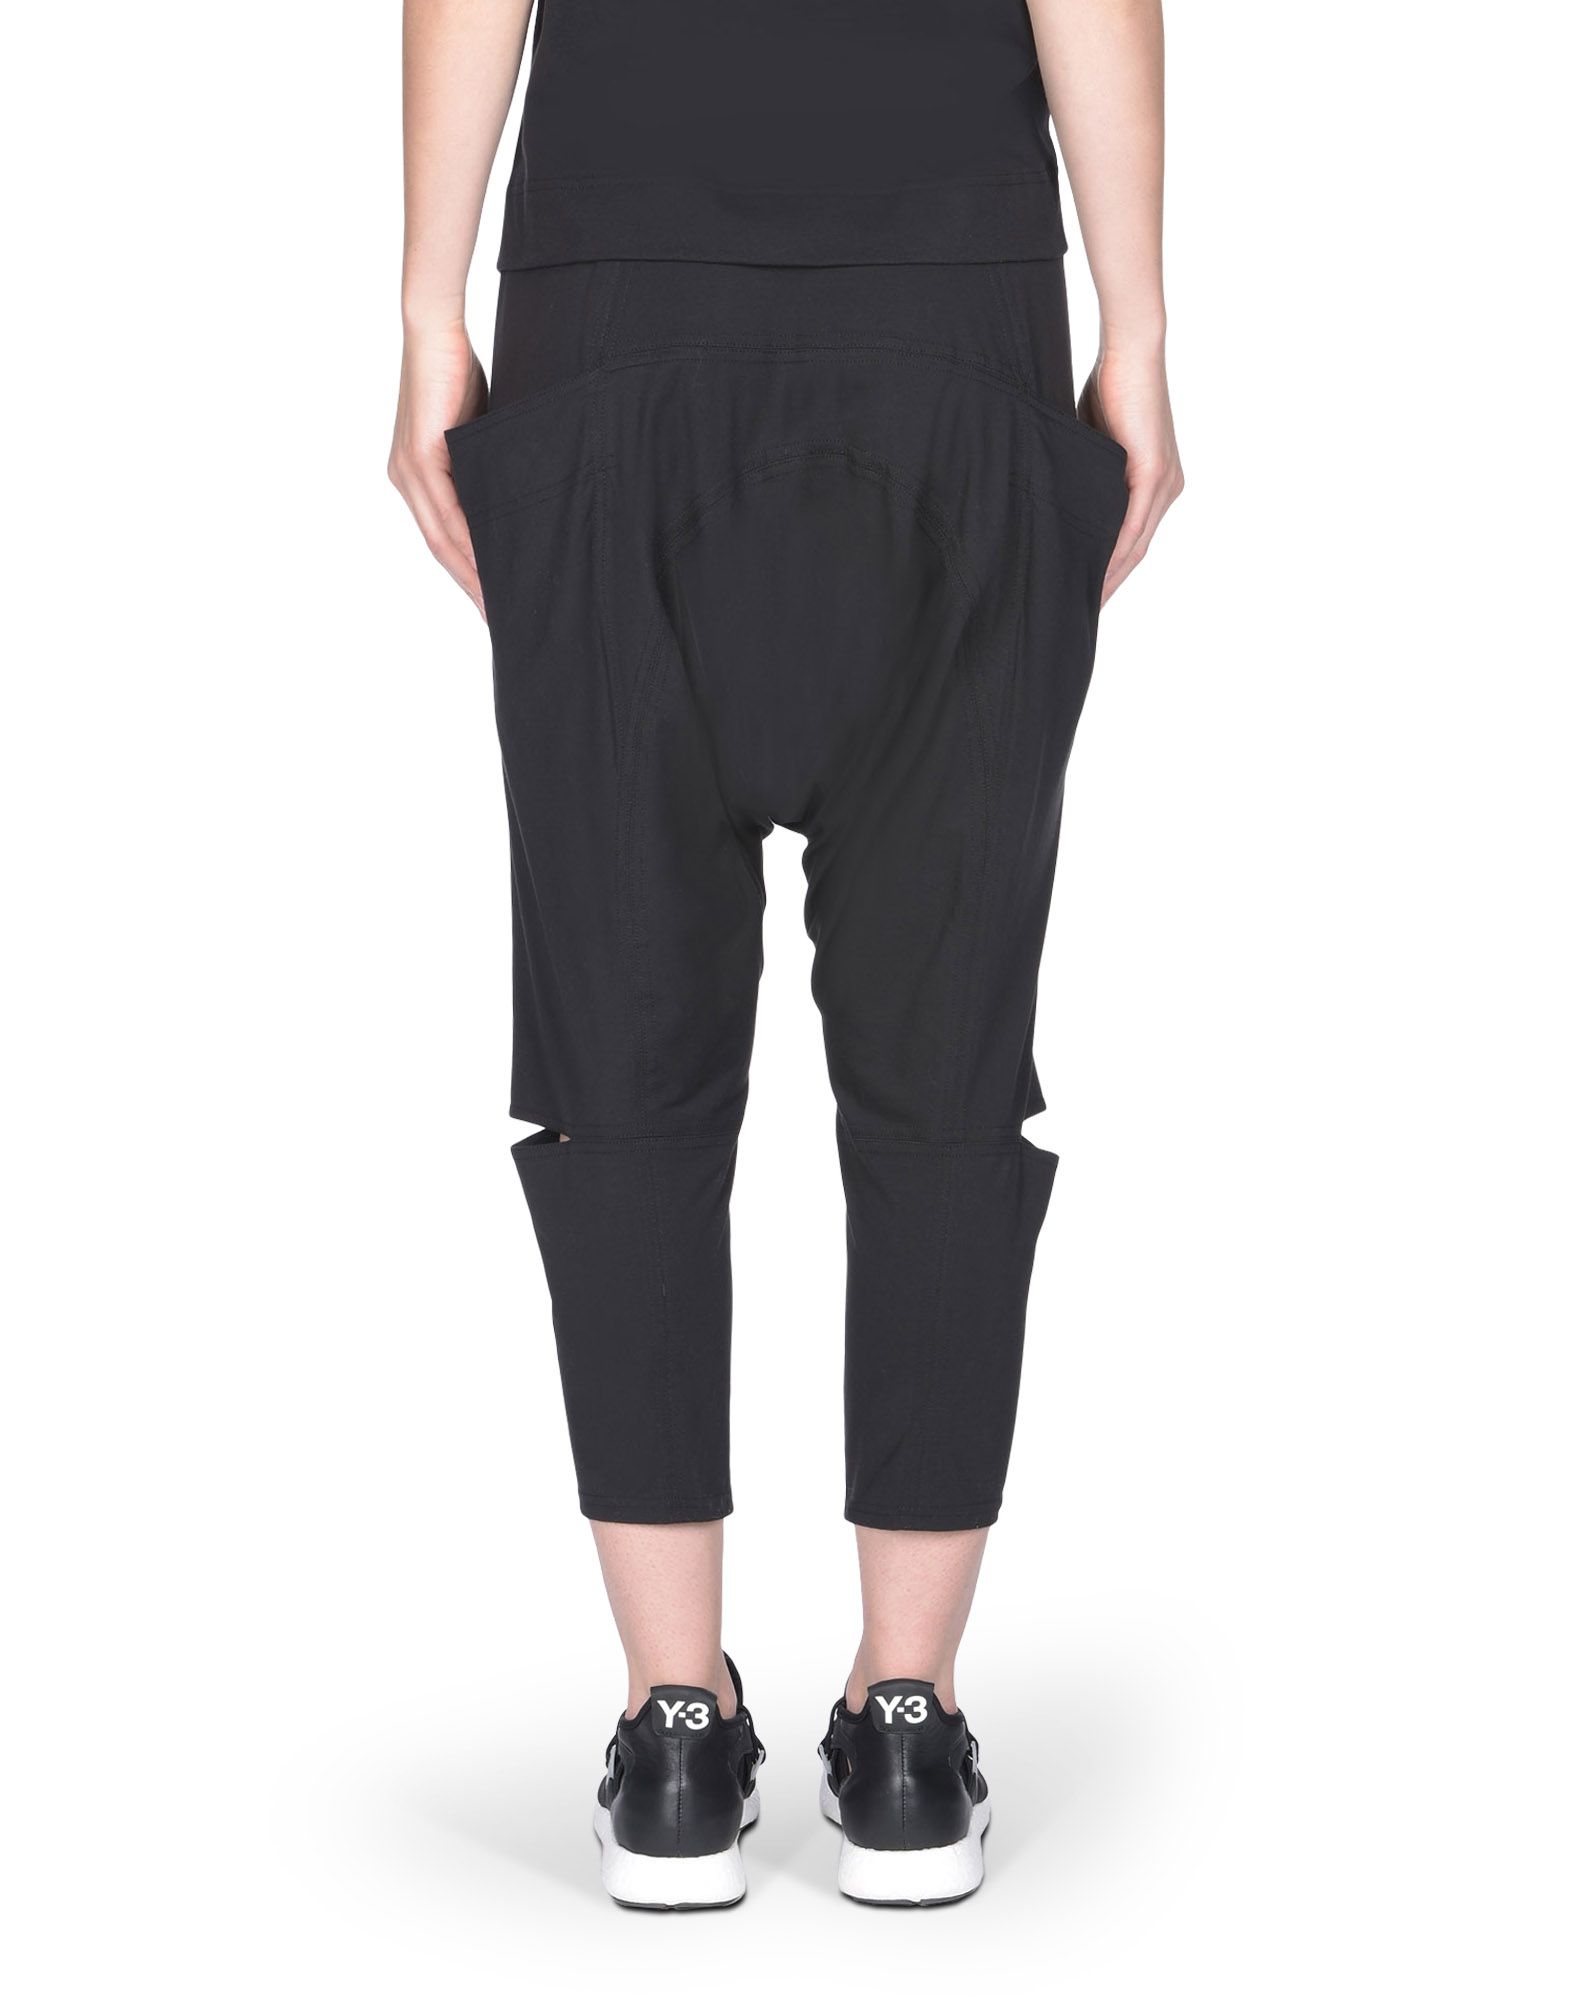 Y 3 JERSEY SAROUEL PANT for Women | Adidas Y-3 Official Store